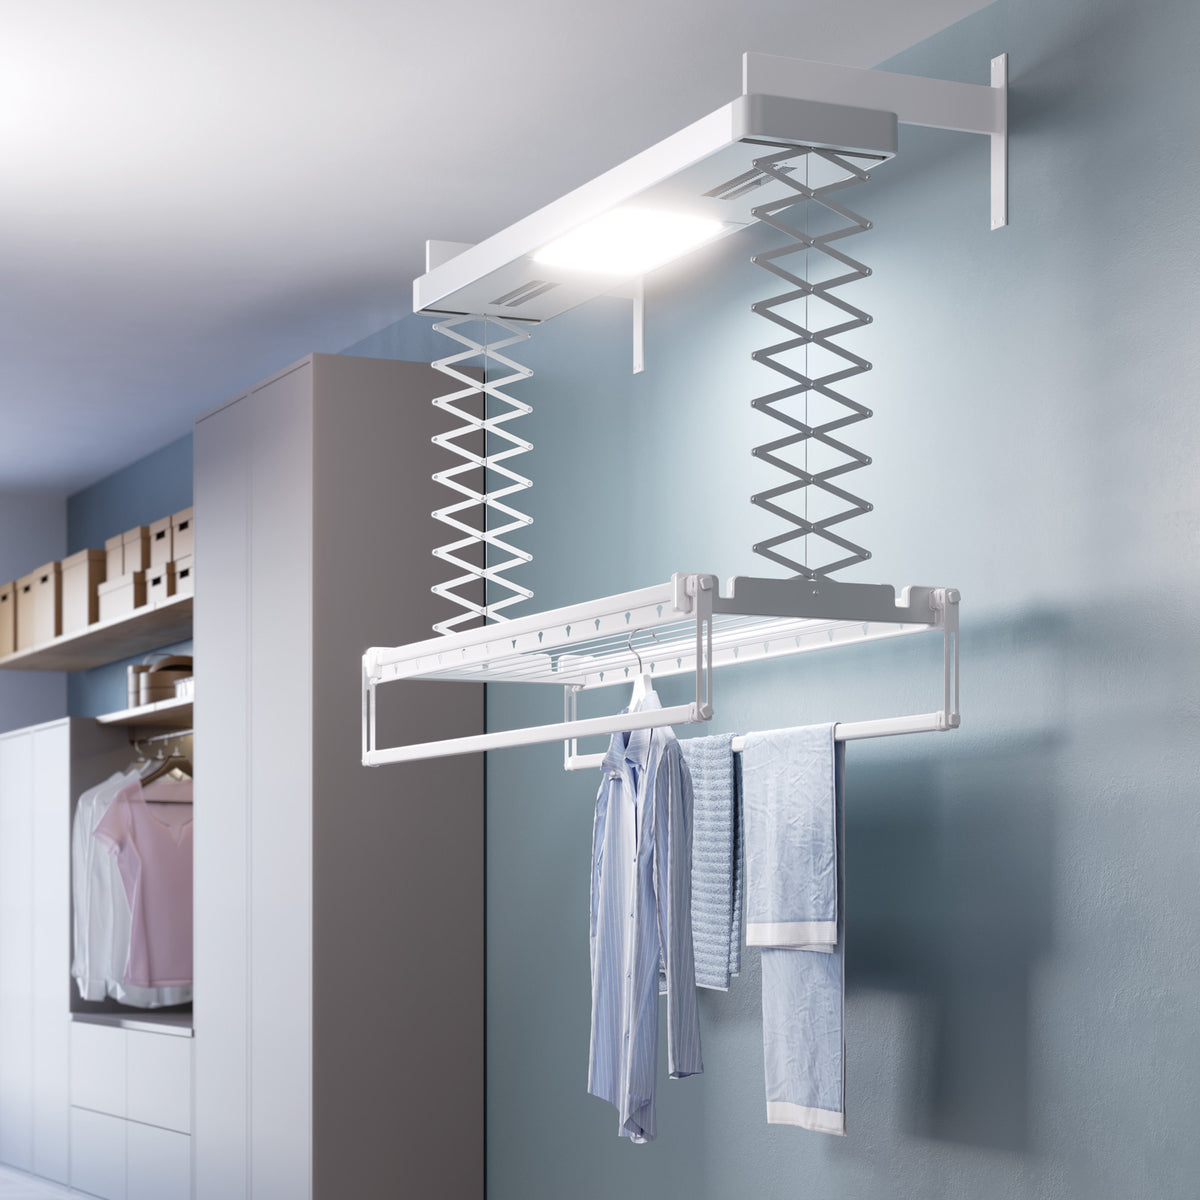 Multi-function Electric Clothes Drying Rack - Buy Lbest Dring Rack With Led  Lamp,Dry Machine For Clothes,Wall Mount Clothes Hanger Product on